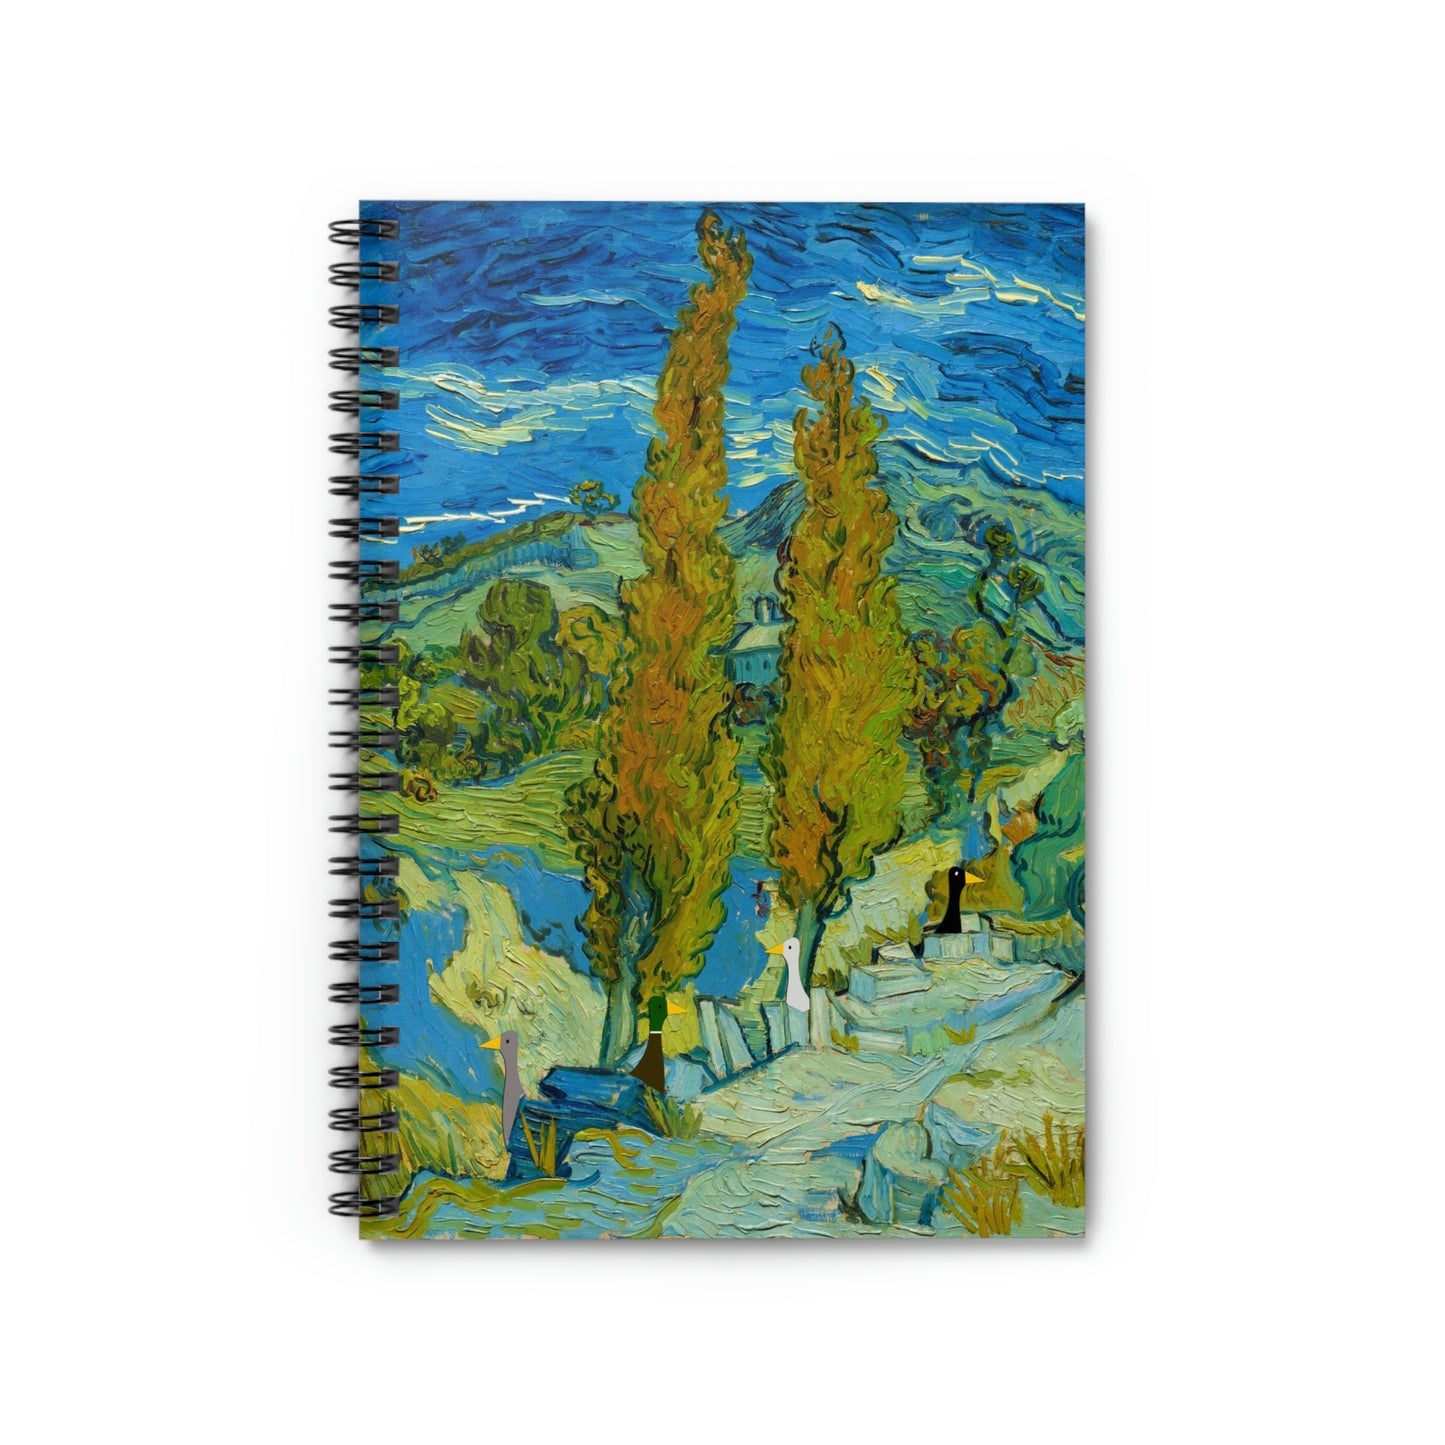 Ducks checking out Two Poplars in the Alpilles near Saint-Remy - Spiral Notebook - Ruled Line